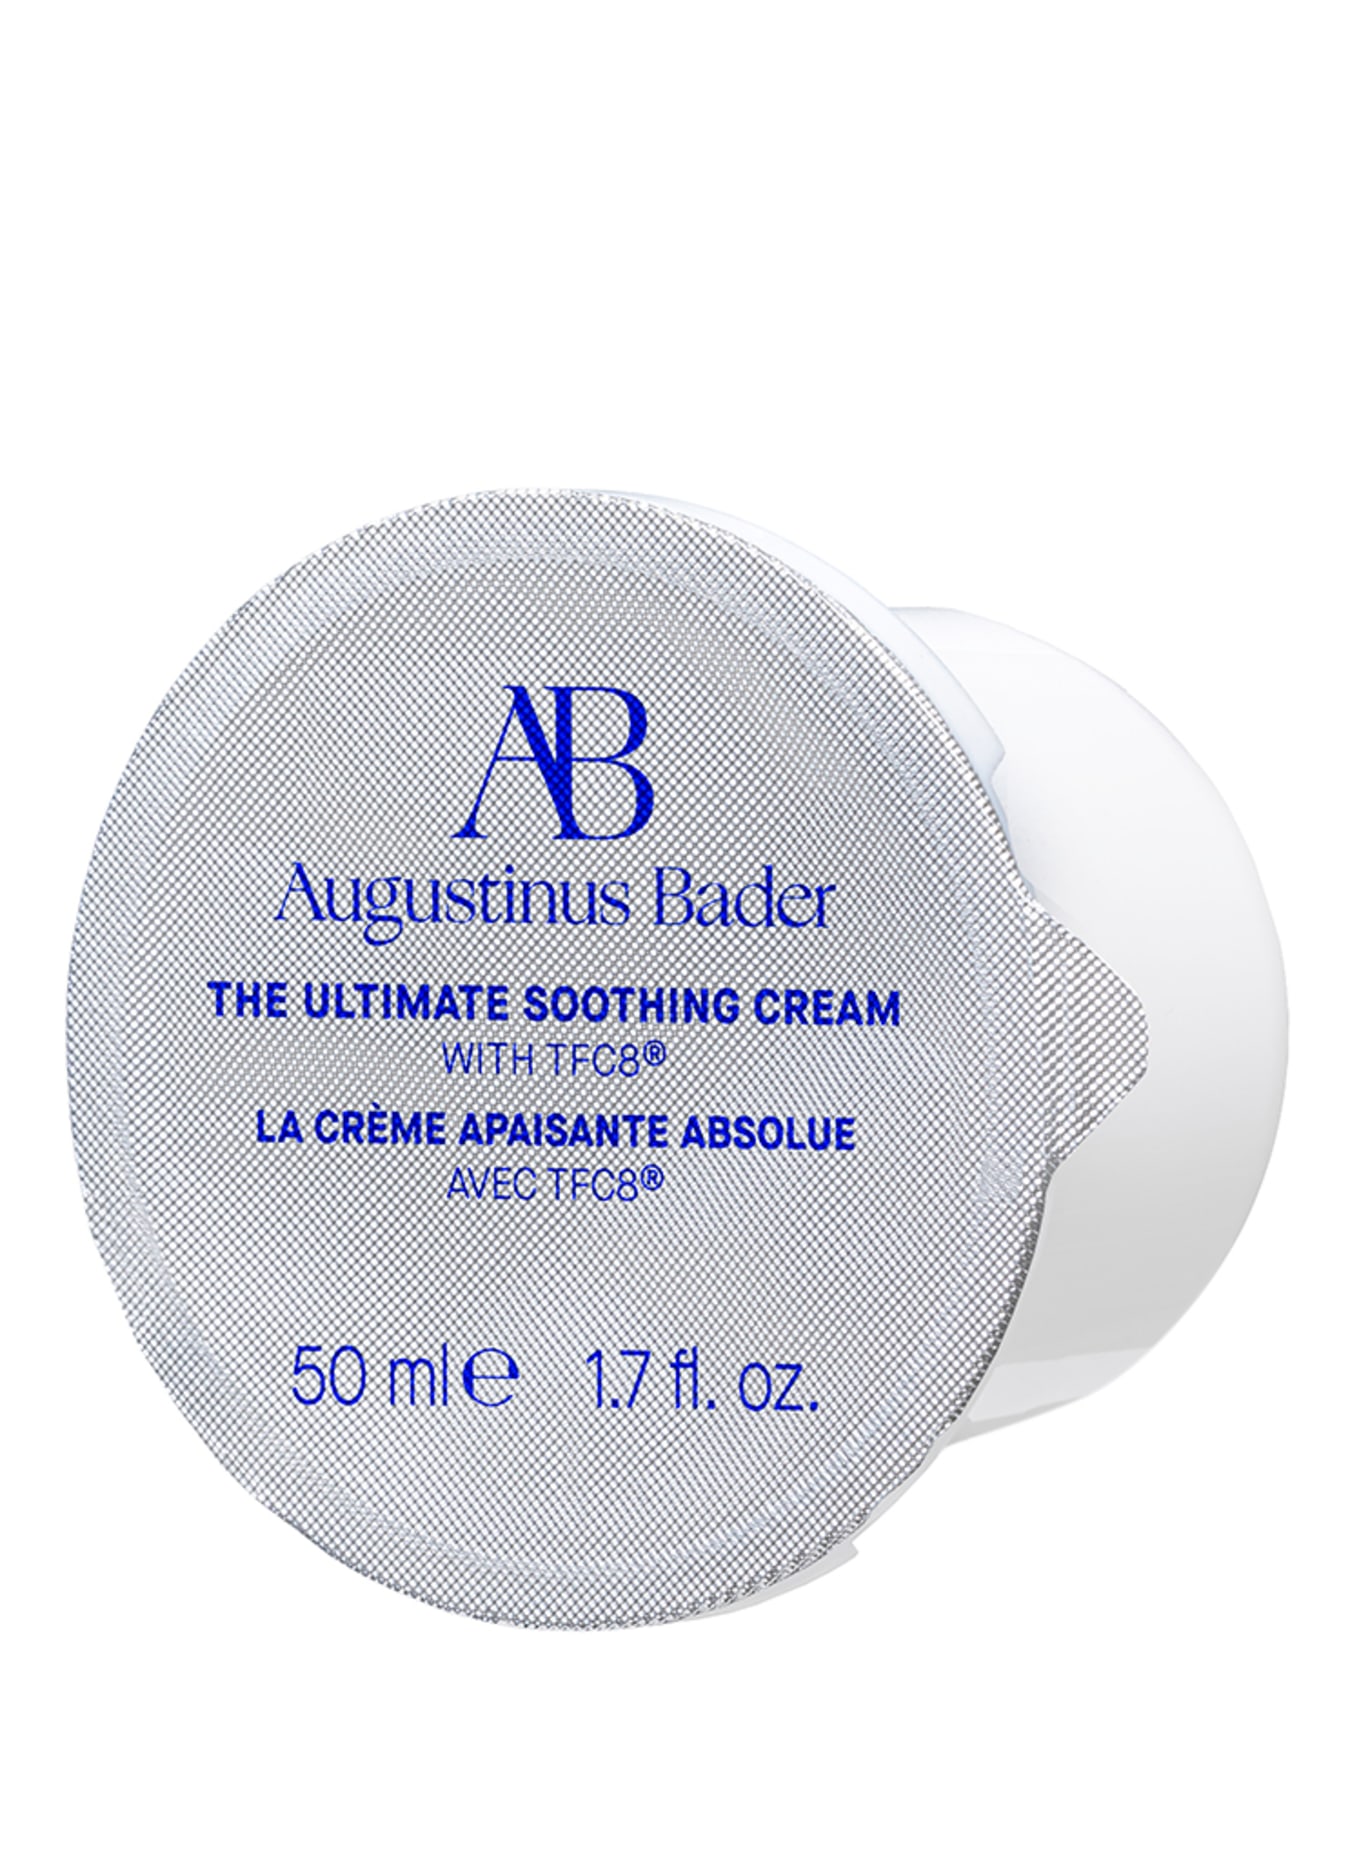 Augustinus Bader THE ULTIMATE SOOTHING CREAM REFILL (Bild 1)